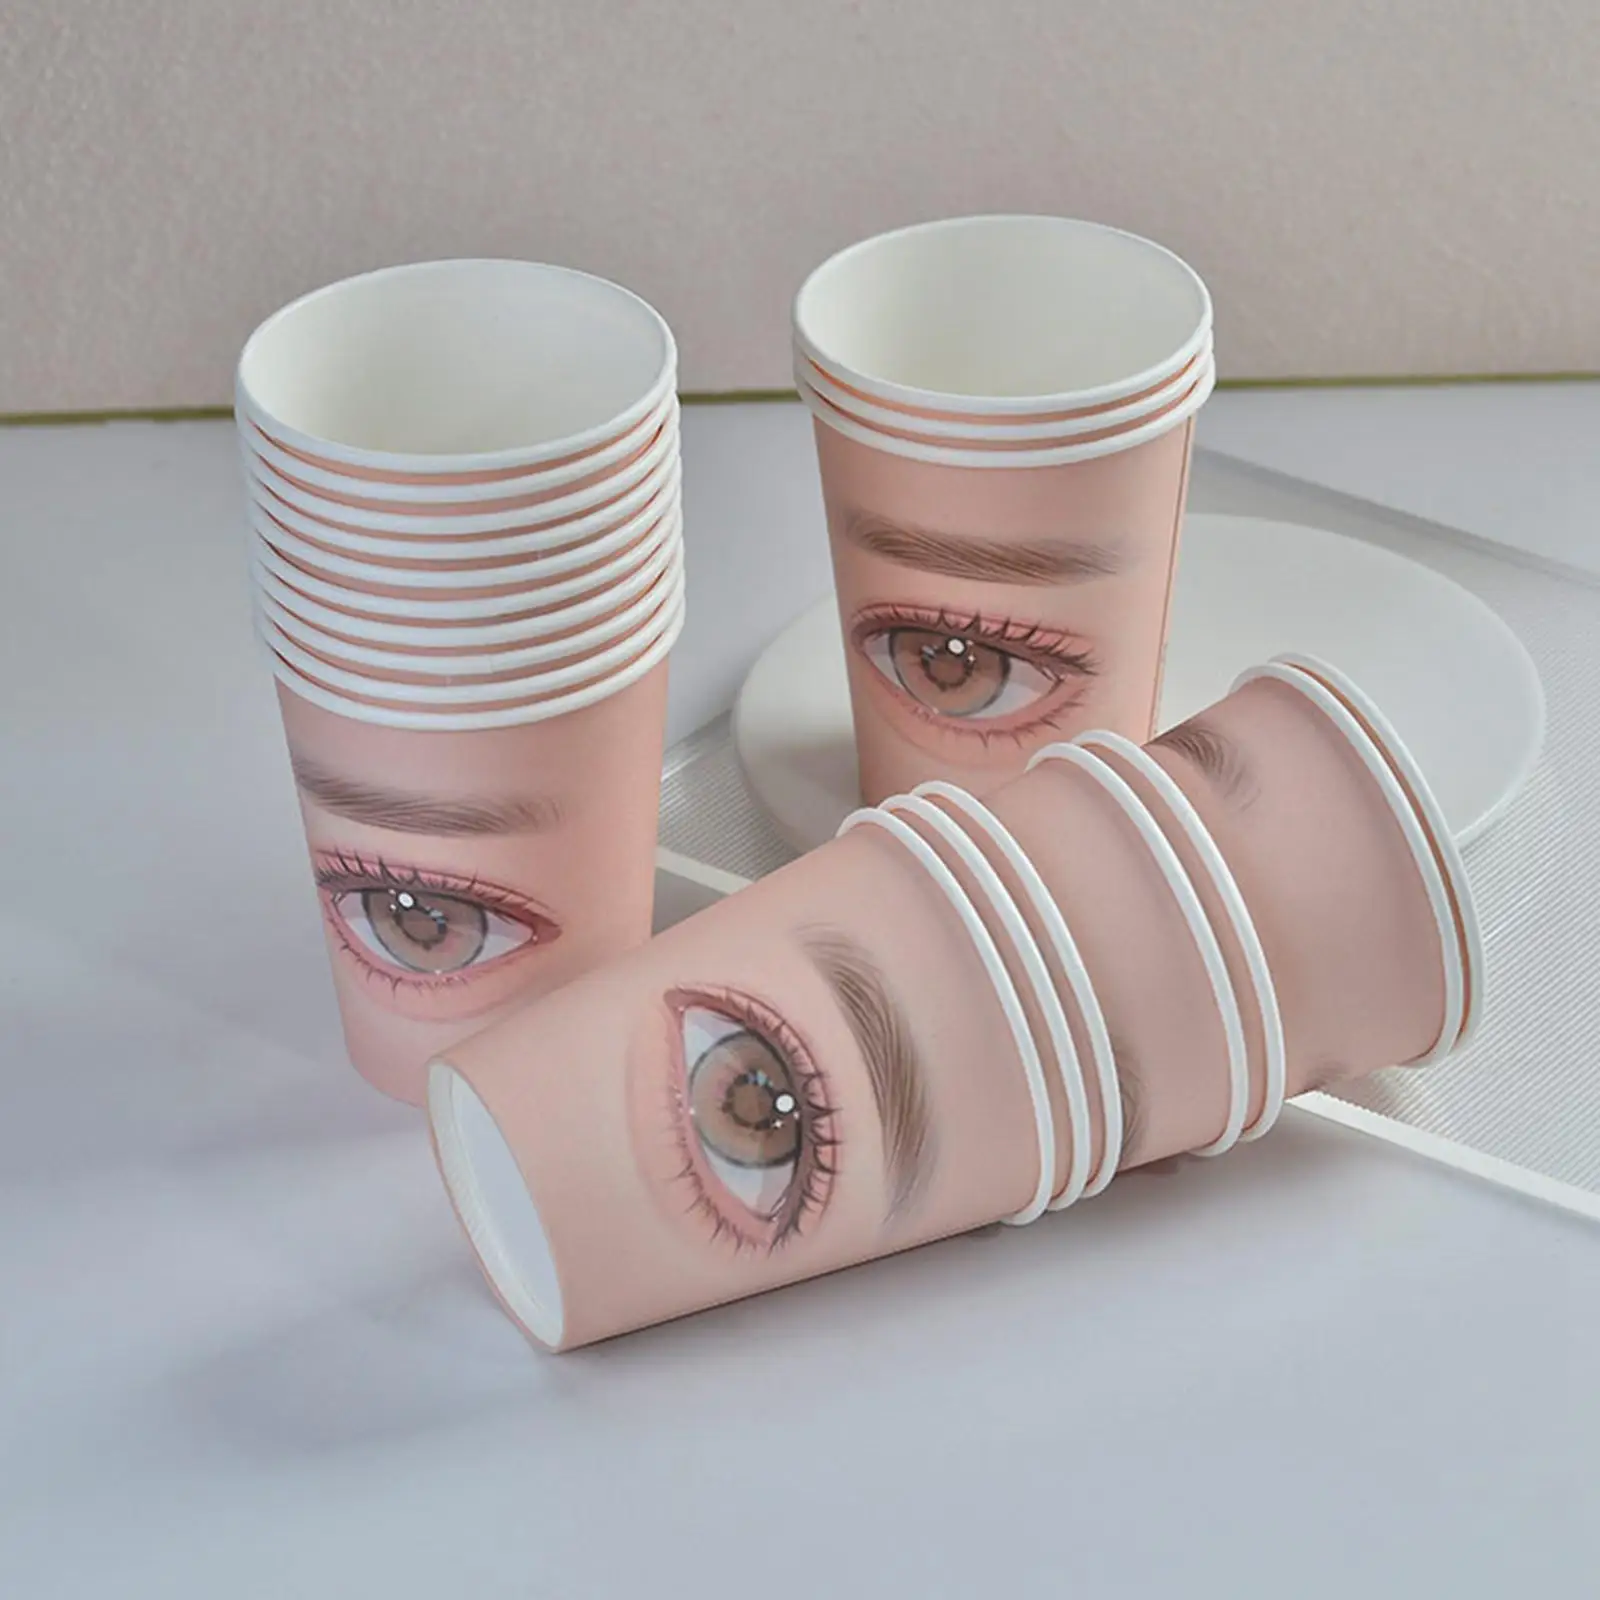 20 Pieces Eyelash Practice Paper Cup Cosmetology Mannequin Durable Makeup Multifunction for Starters Teaching Aid Auxiliary Tool